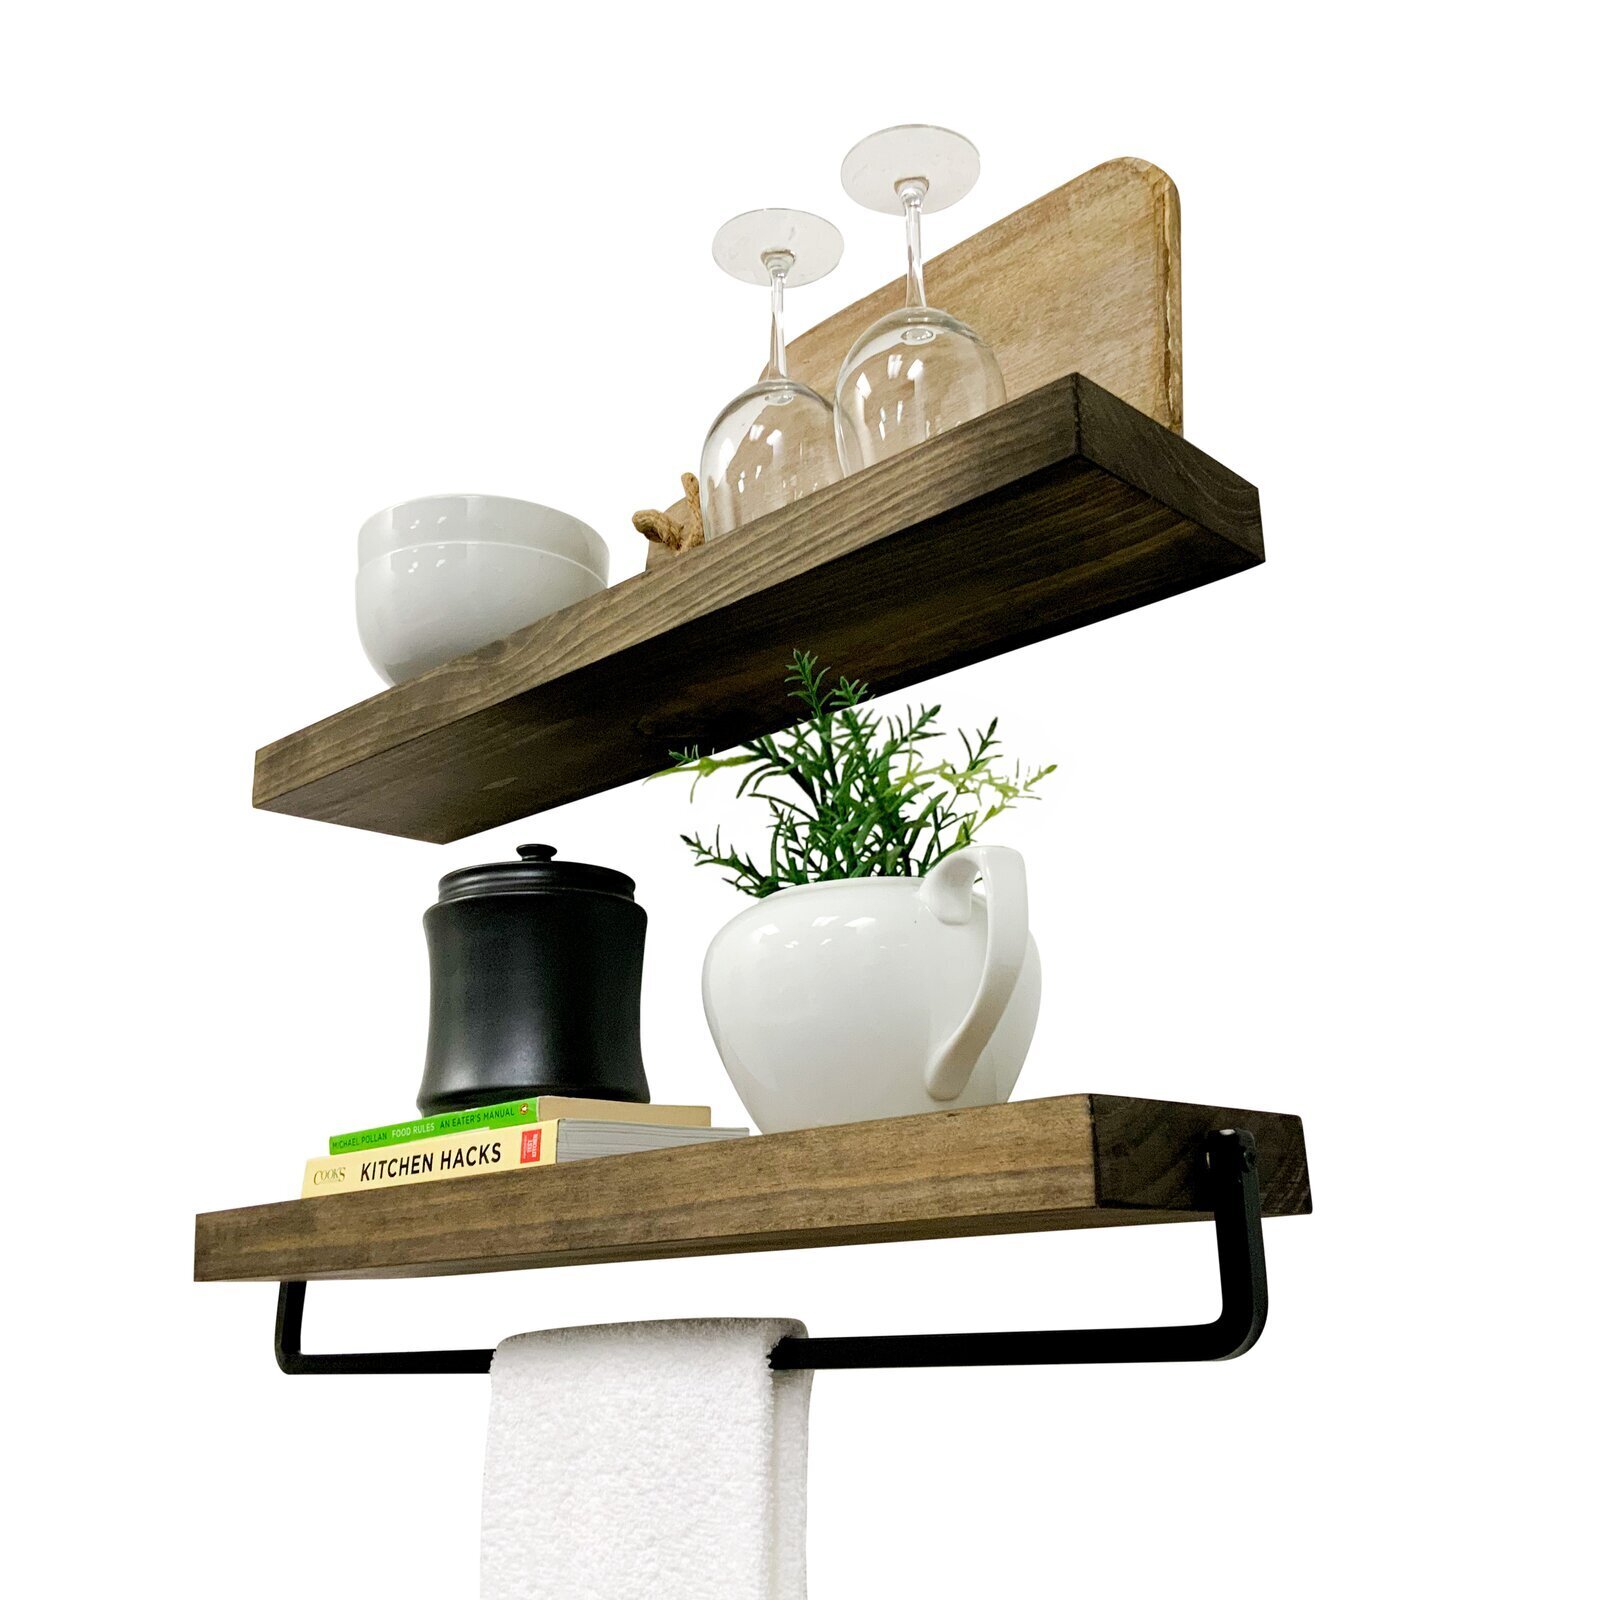 Floating natural wood shelves with built in towel bar